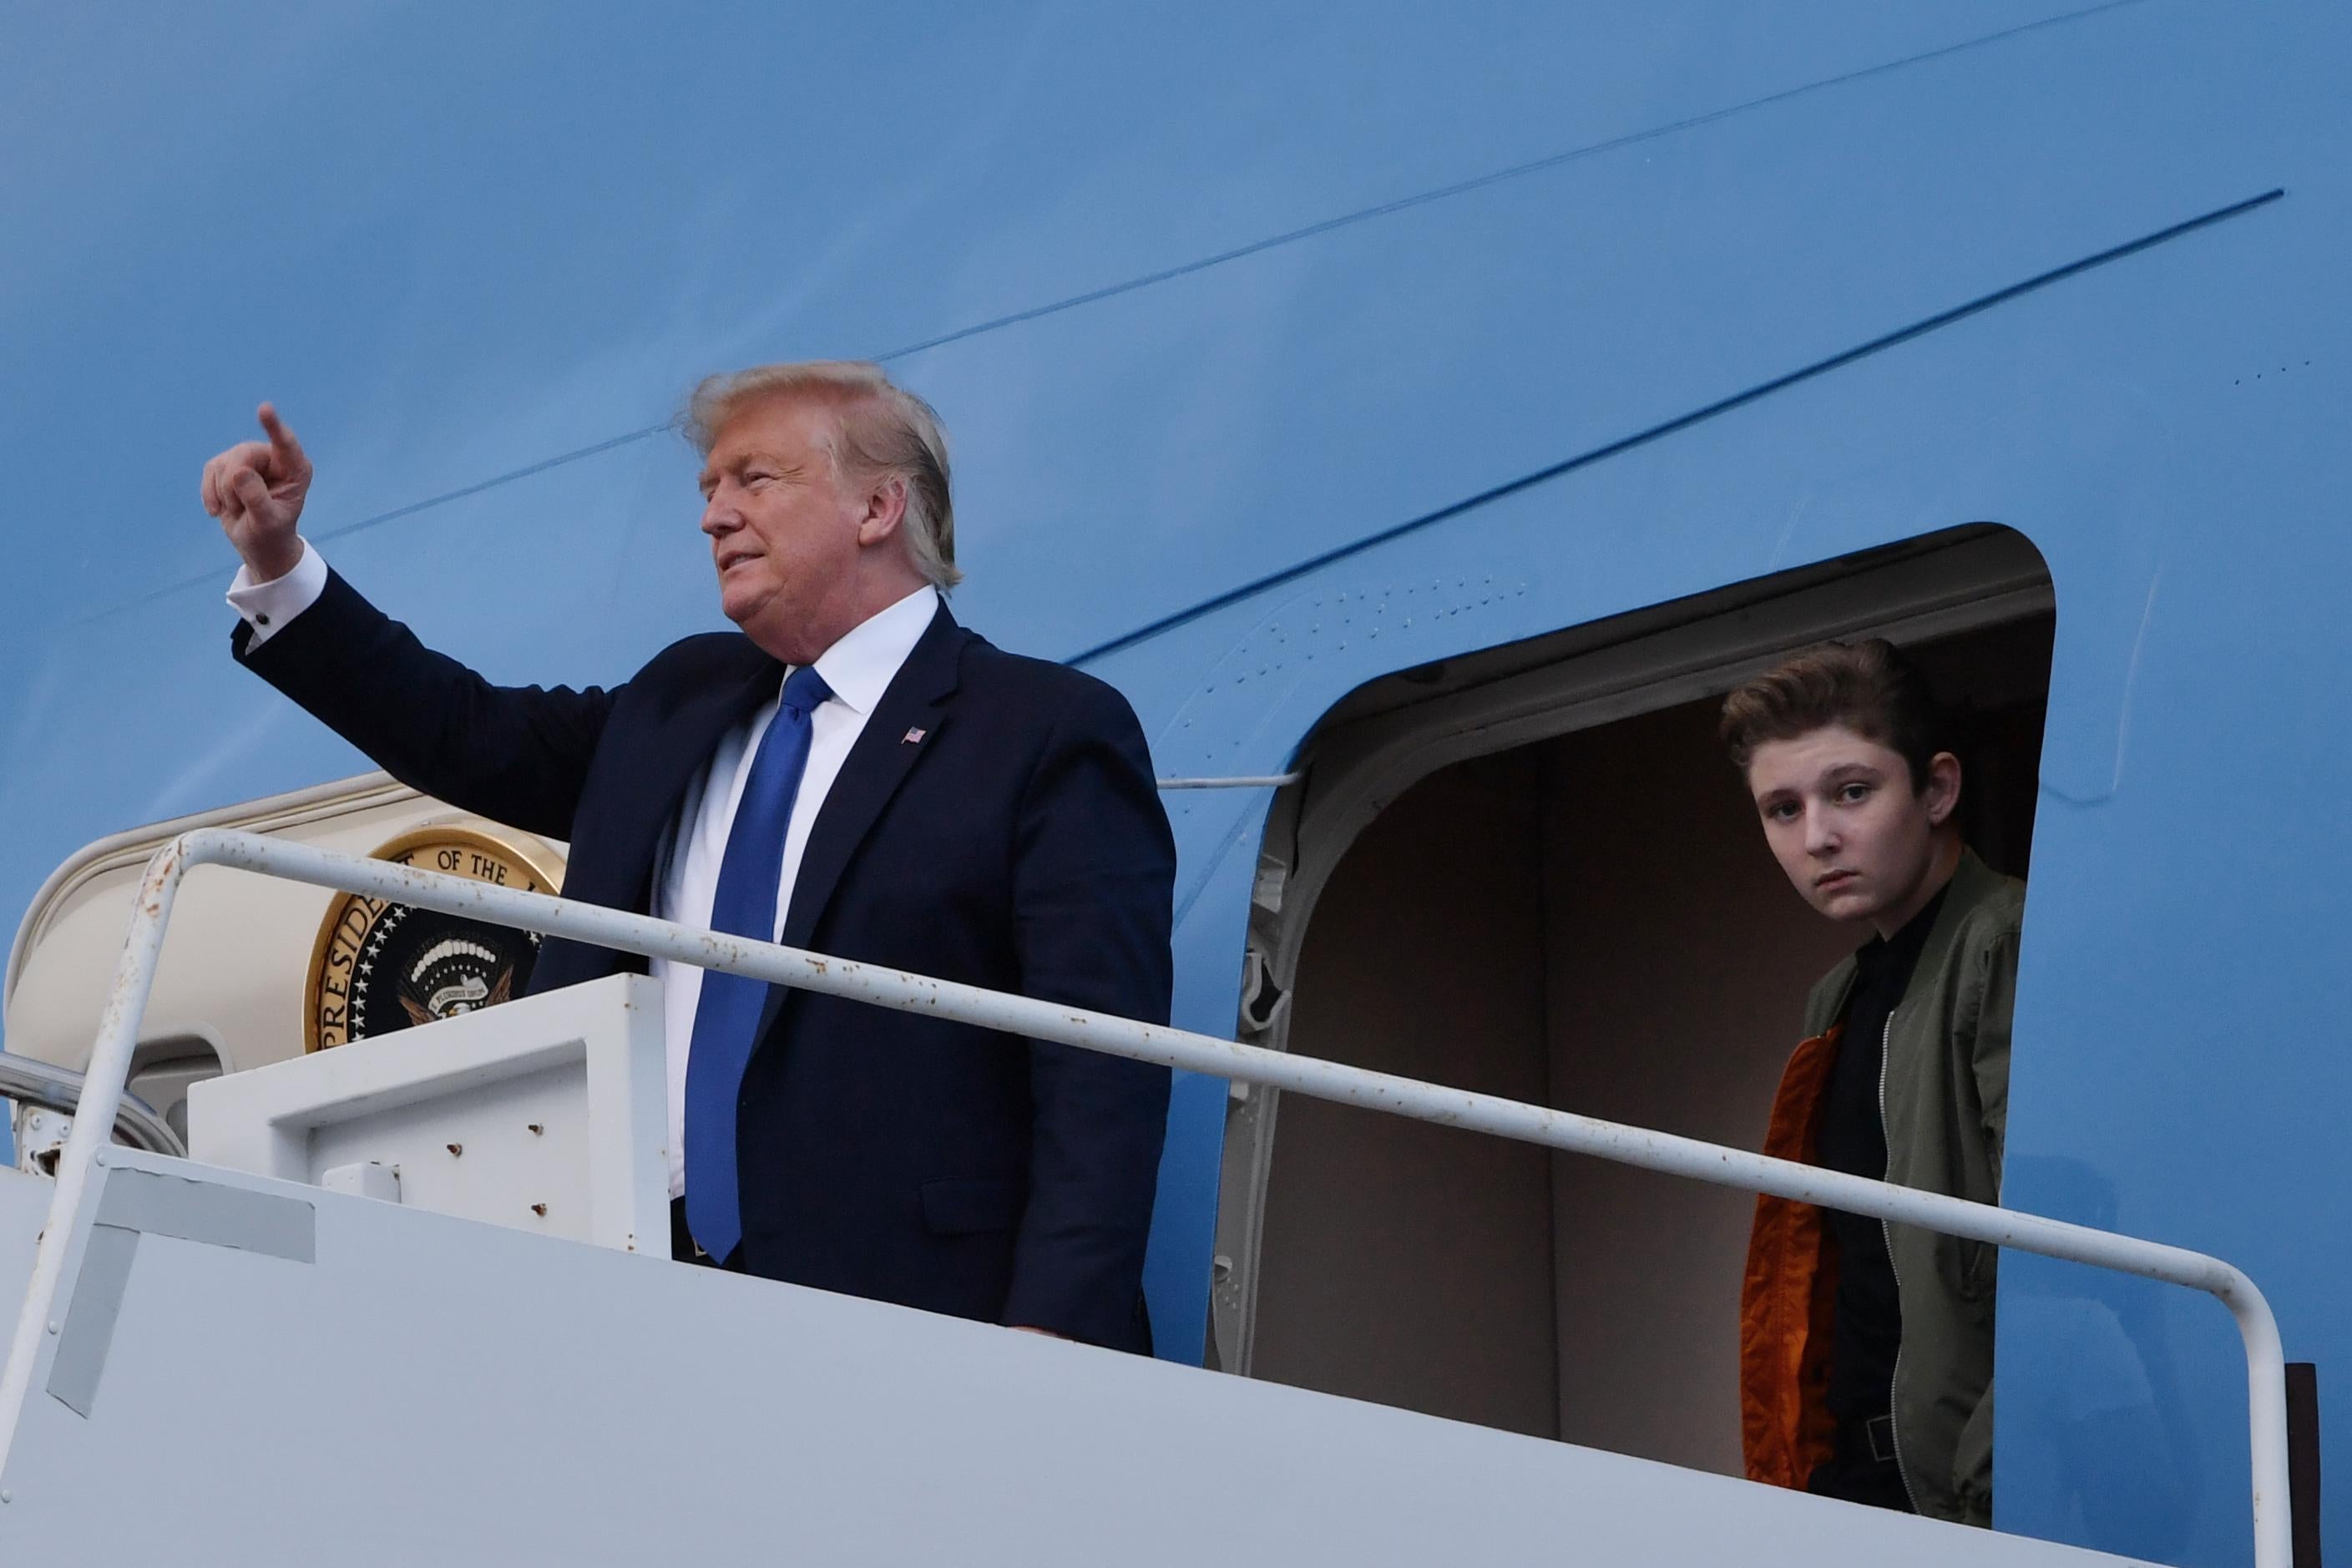 Donald and Barron Trump exit a plane at Palm Beach International Airport